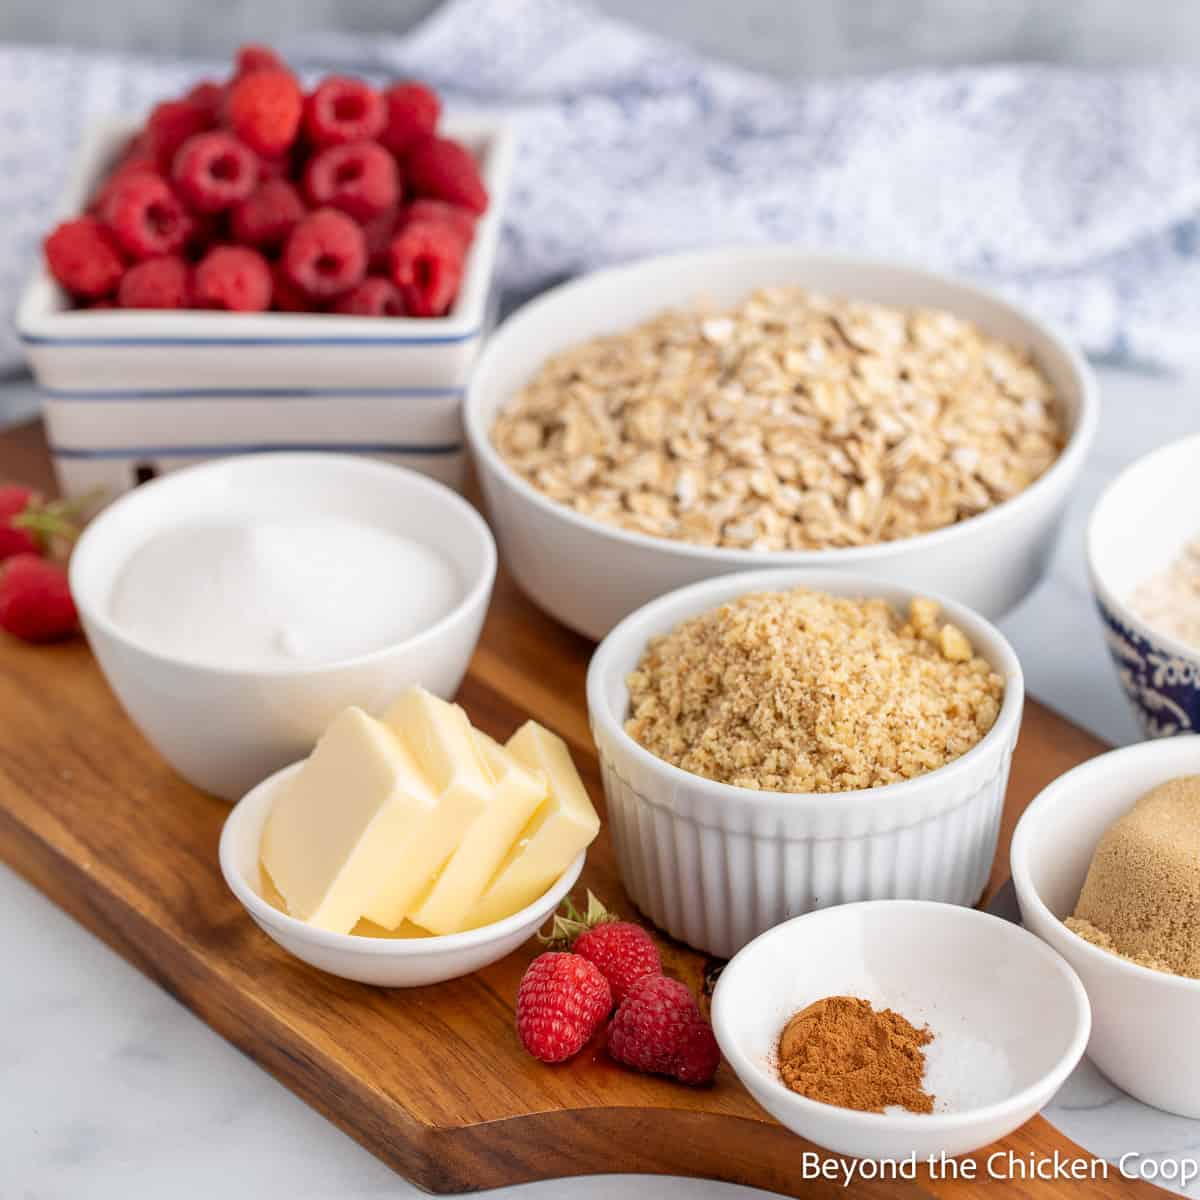 Ingredients for making a raspberry crisp. 